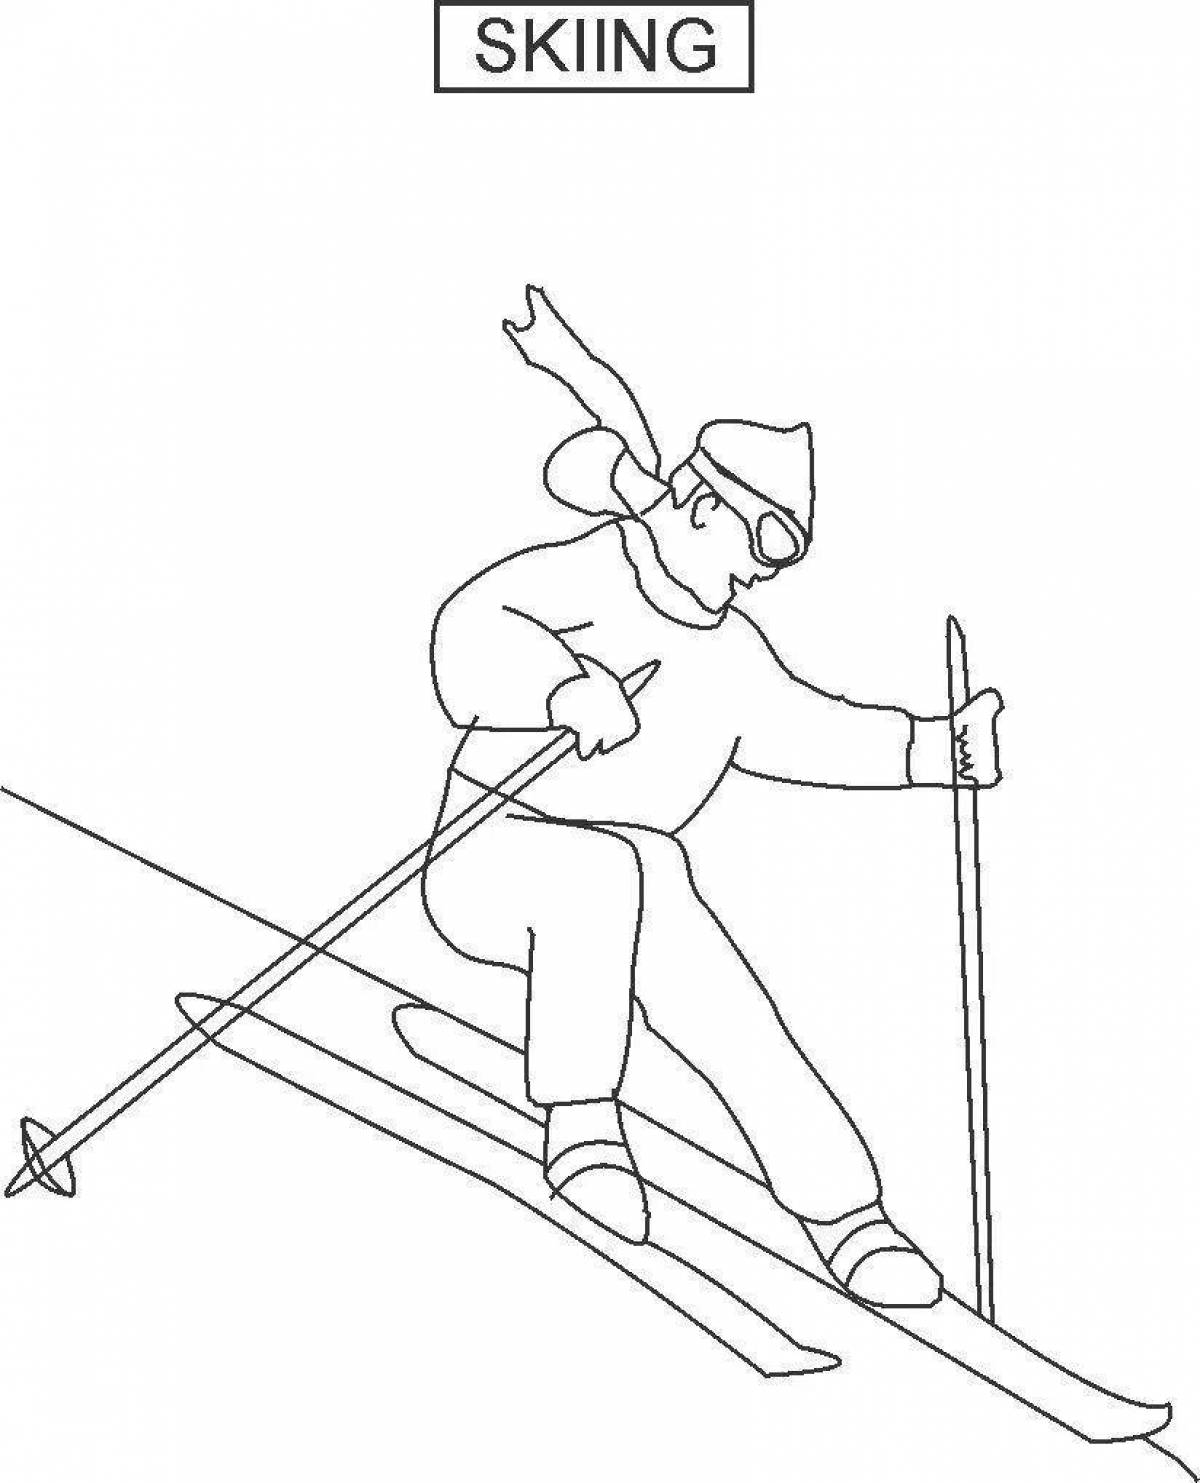 Colorful skiing coloring page